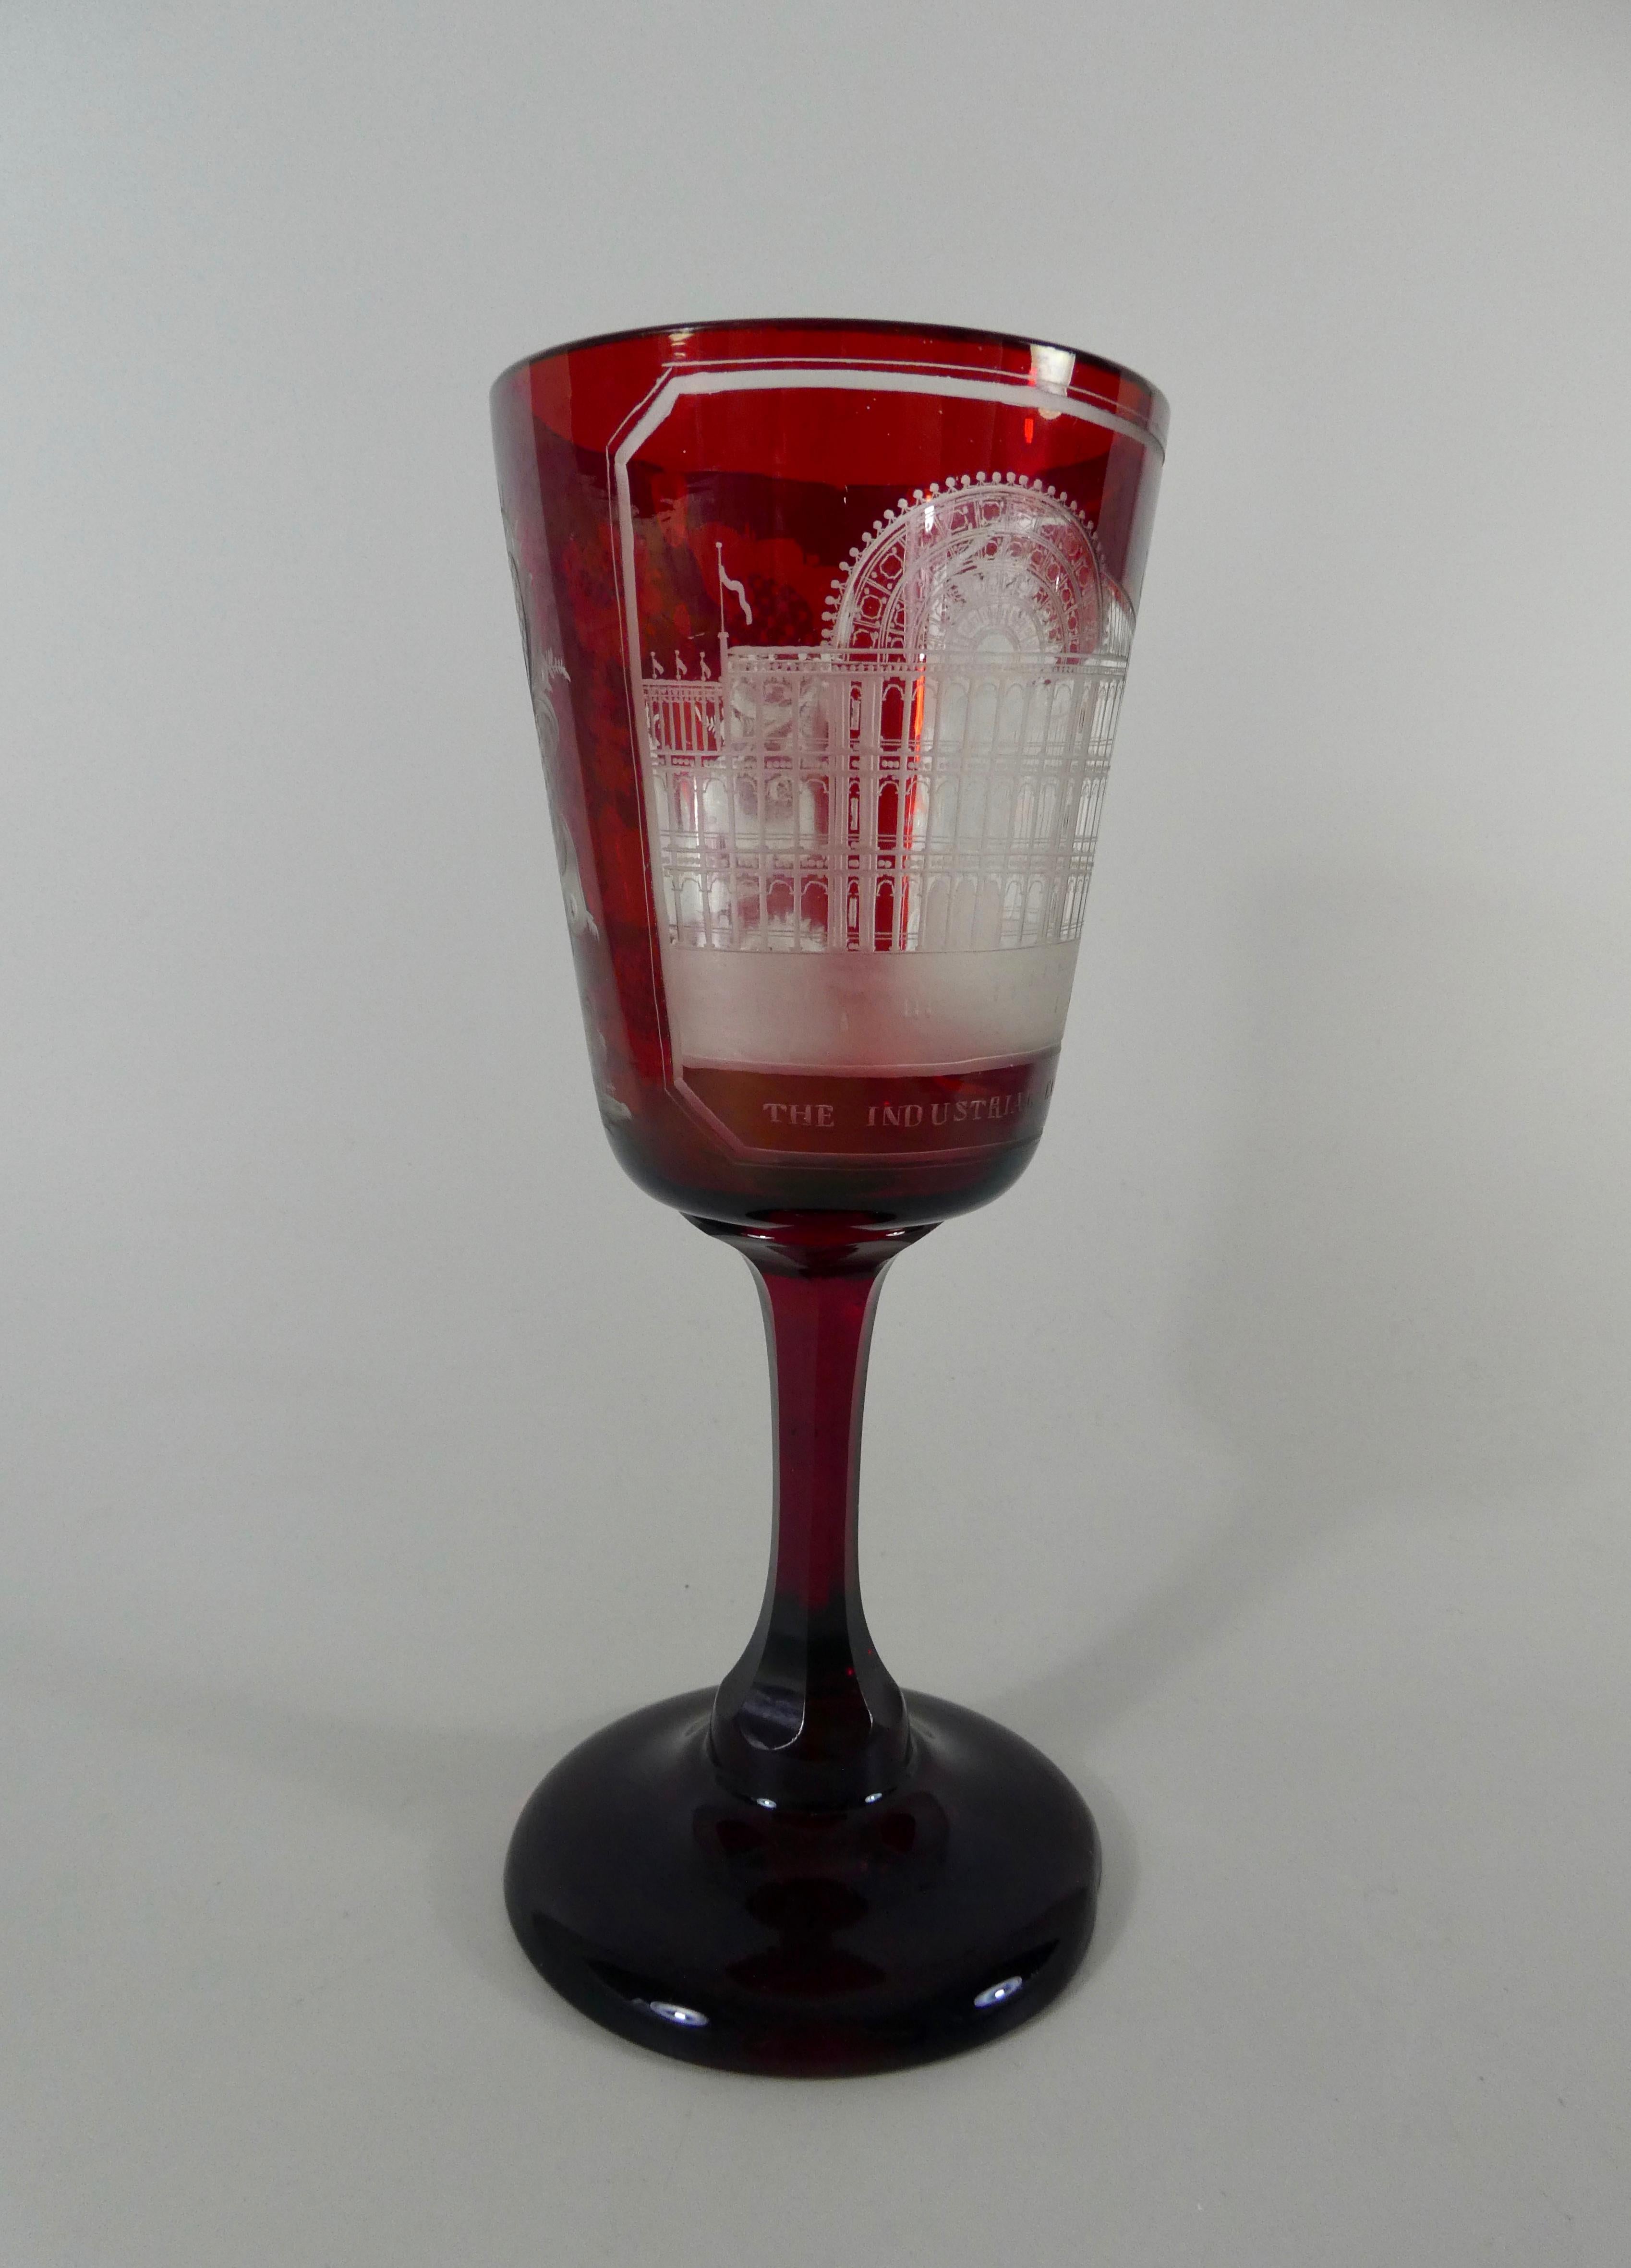 Czech Crystal Palace Great Exhibition Commemorative Glass, 1851